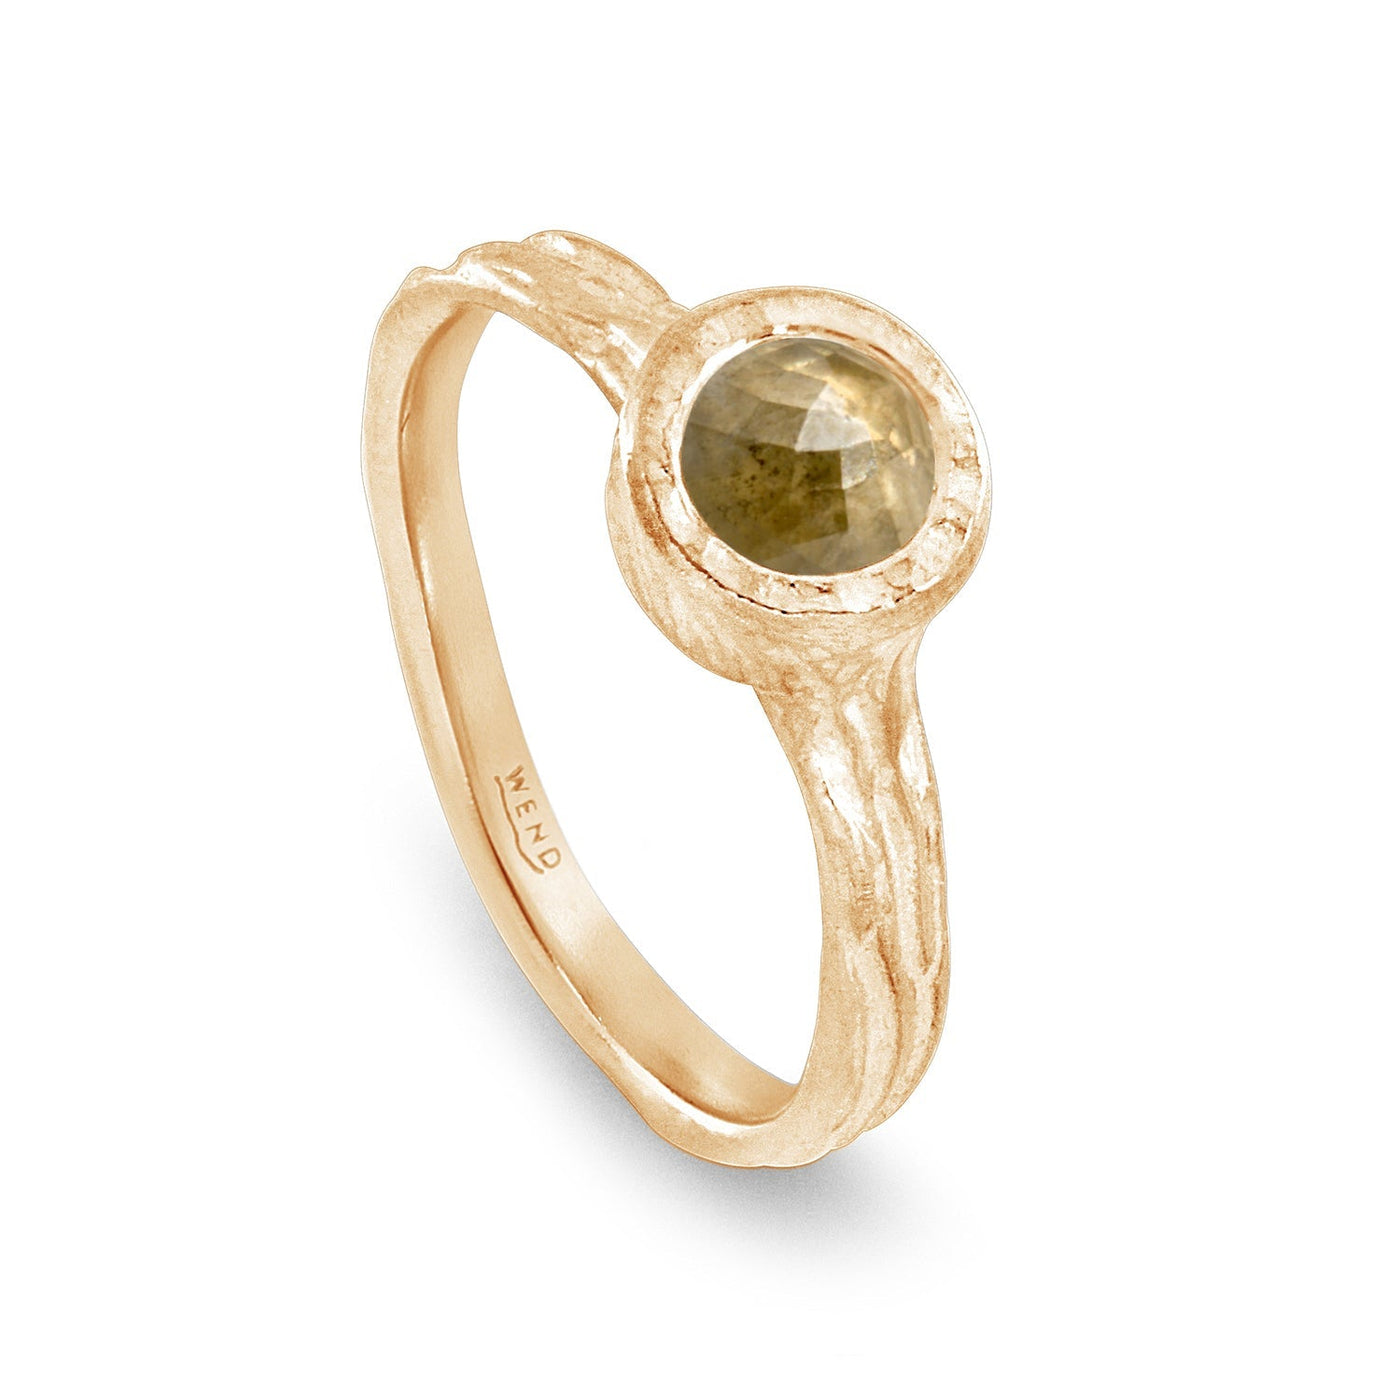 Roots ring bands look like branches or a branches ring with a lab created diamond in certified recycled gold by WEND Jewelry #gemstone-size_5mm